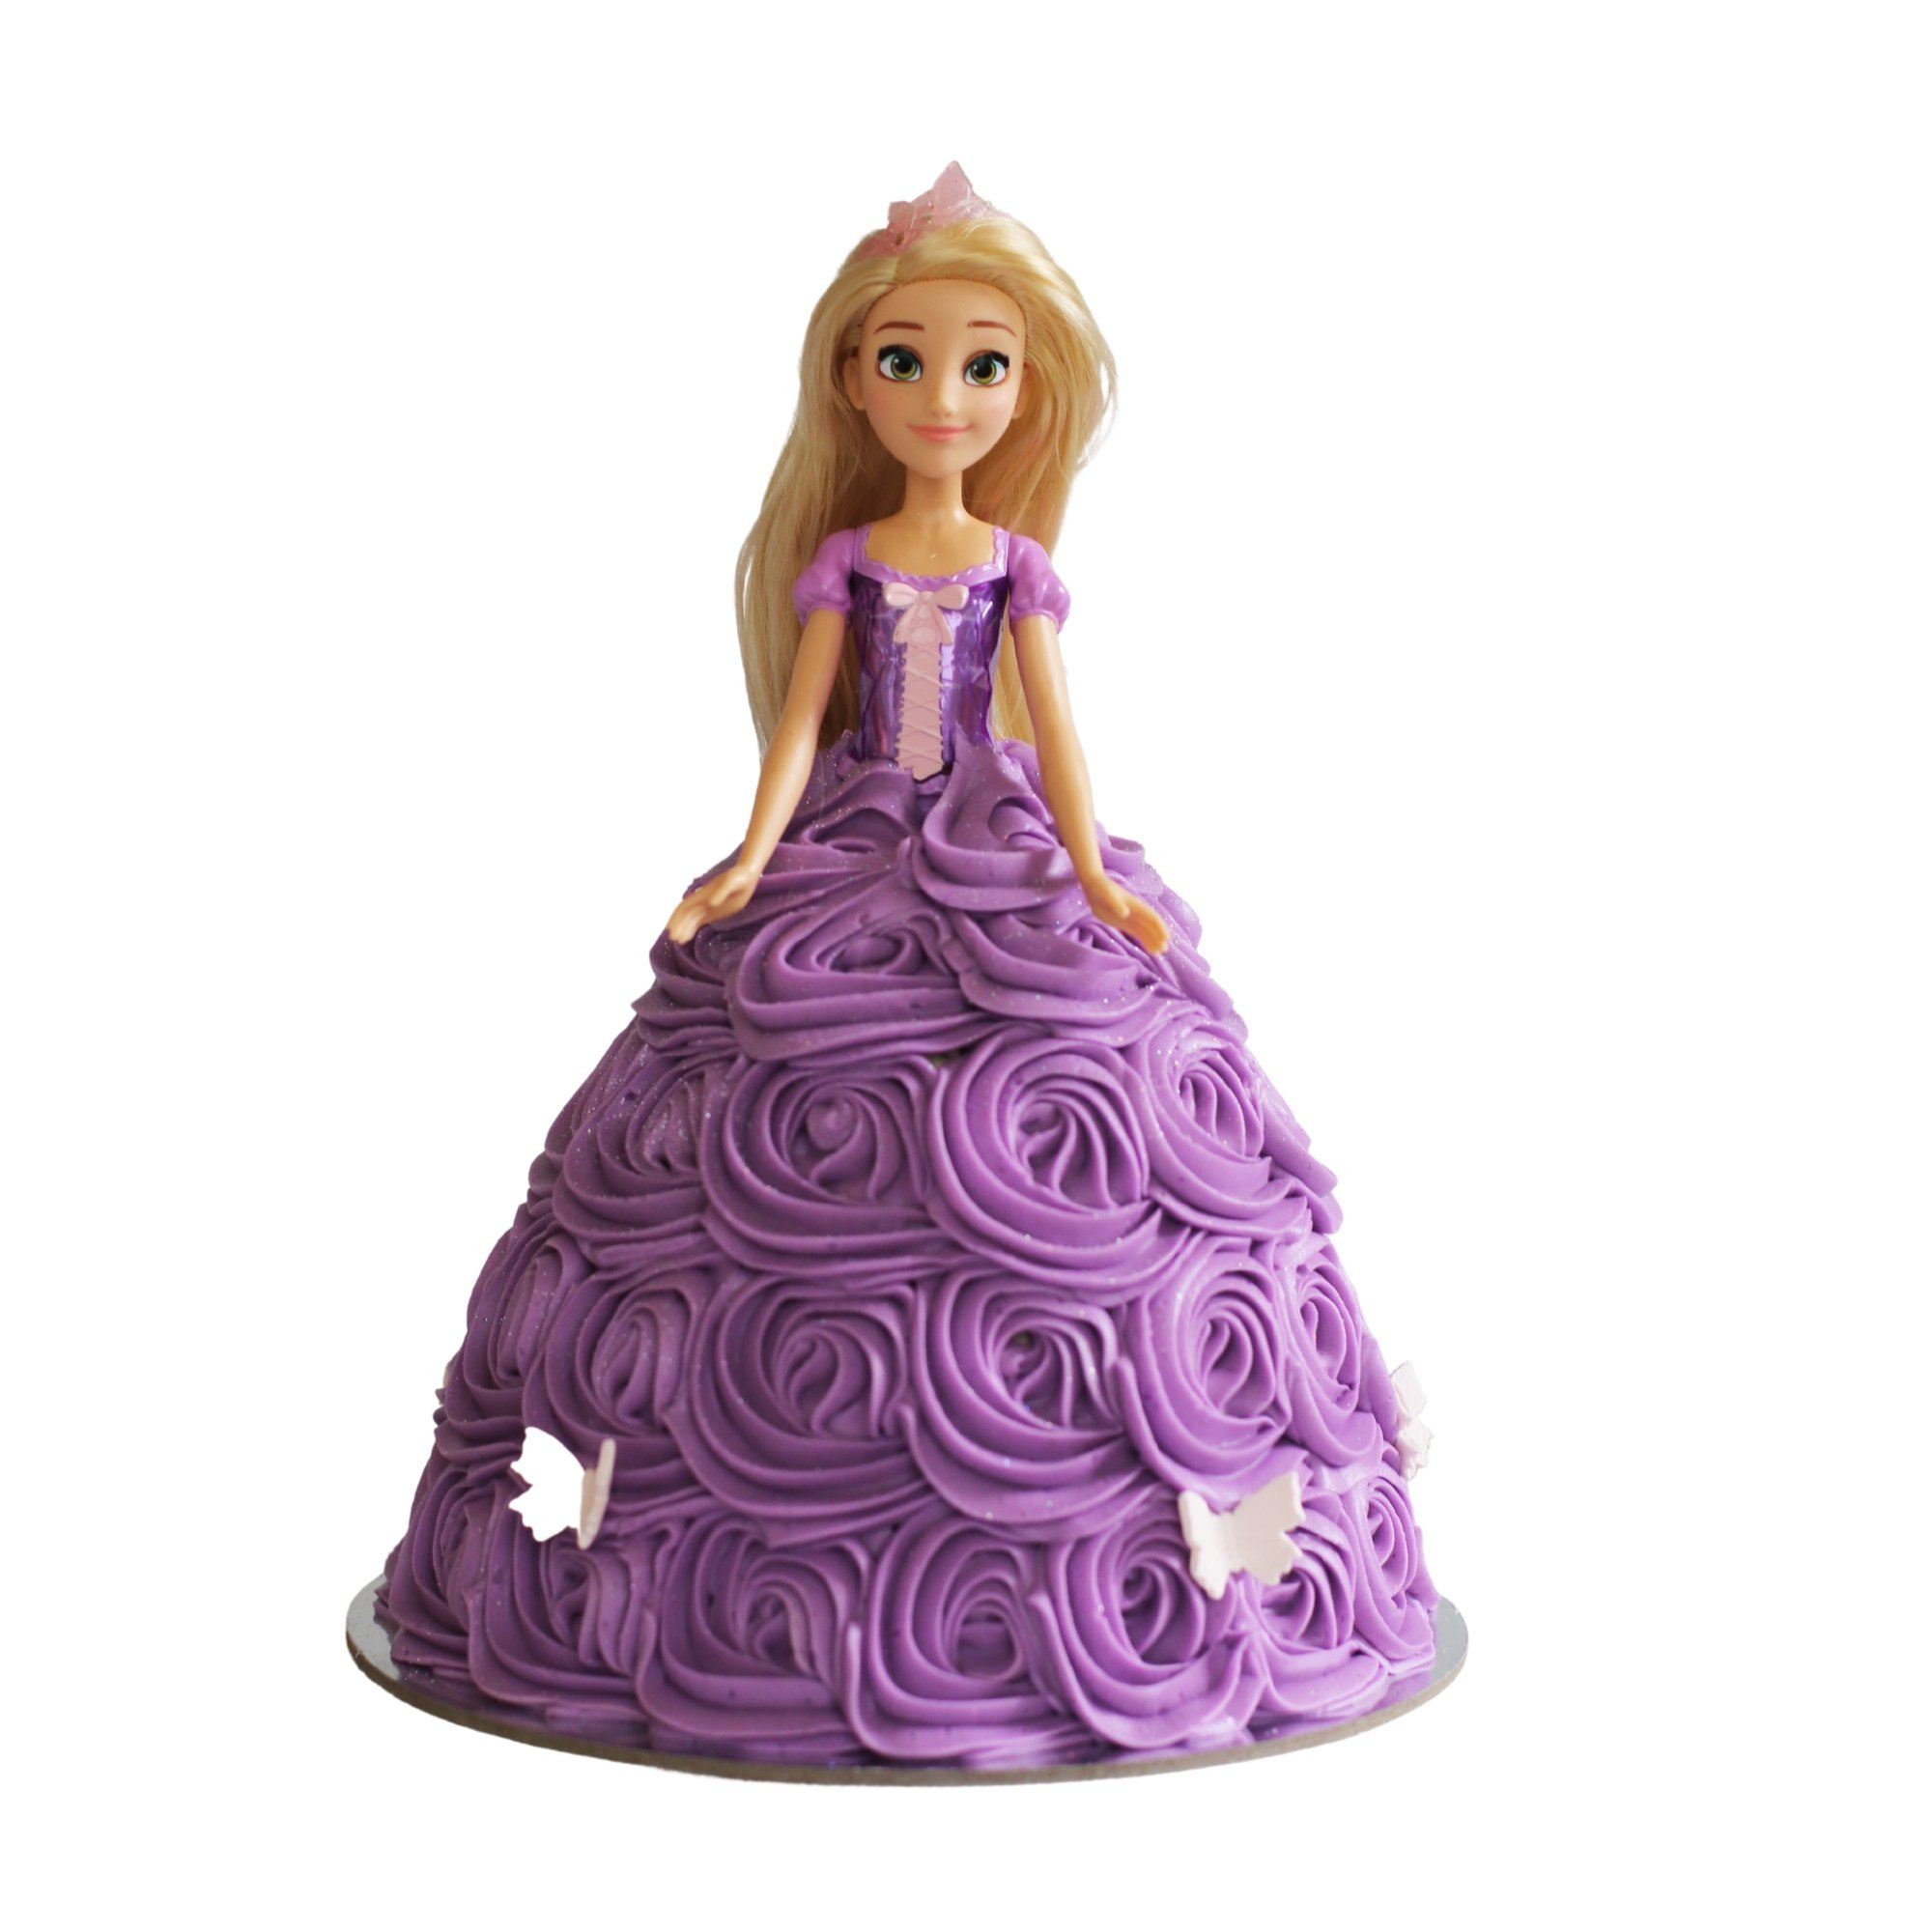 Rapunzel Doll Cake Special Occasion The Cupcake Queens 